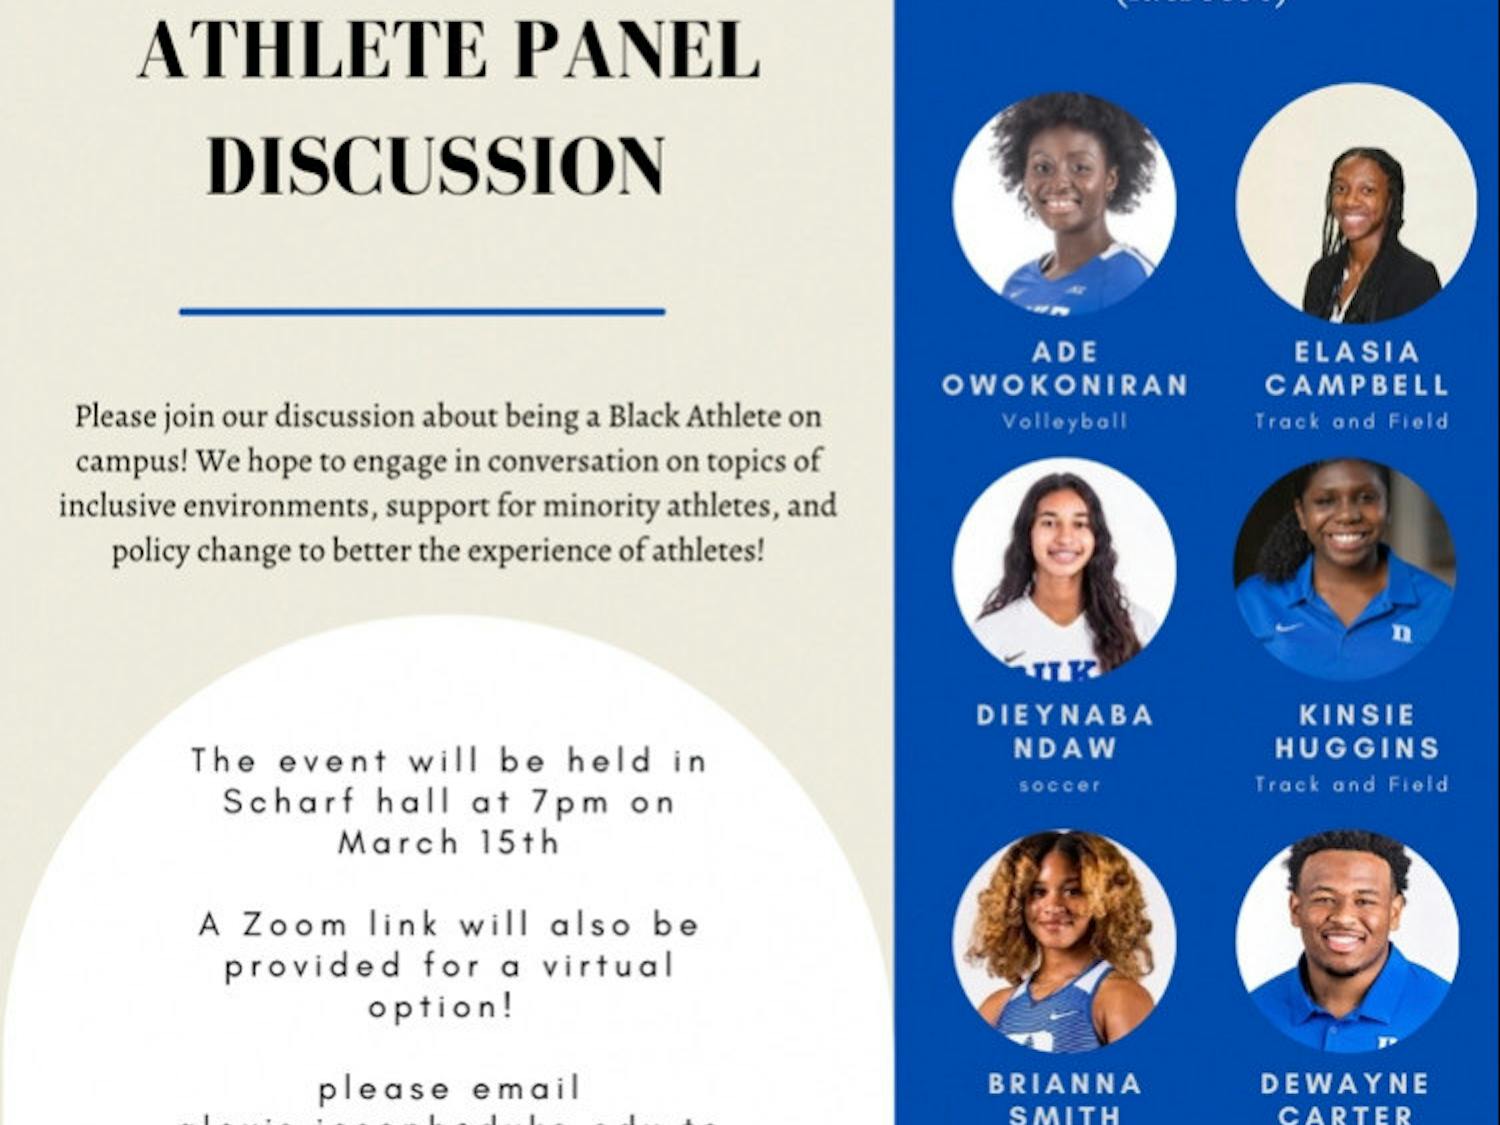 Six athletes formed the panel during the Duke United Black Athletes discussion that took place March 15.&nbsp;